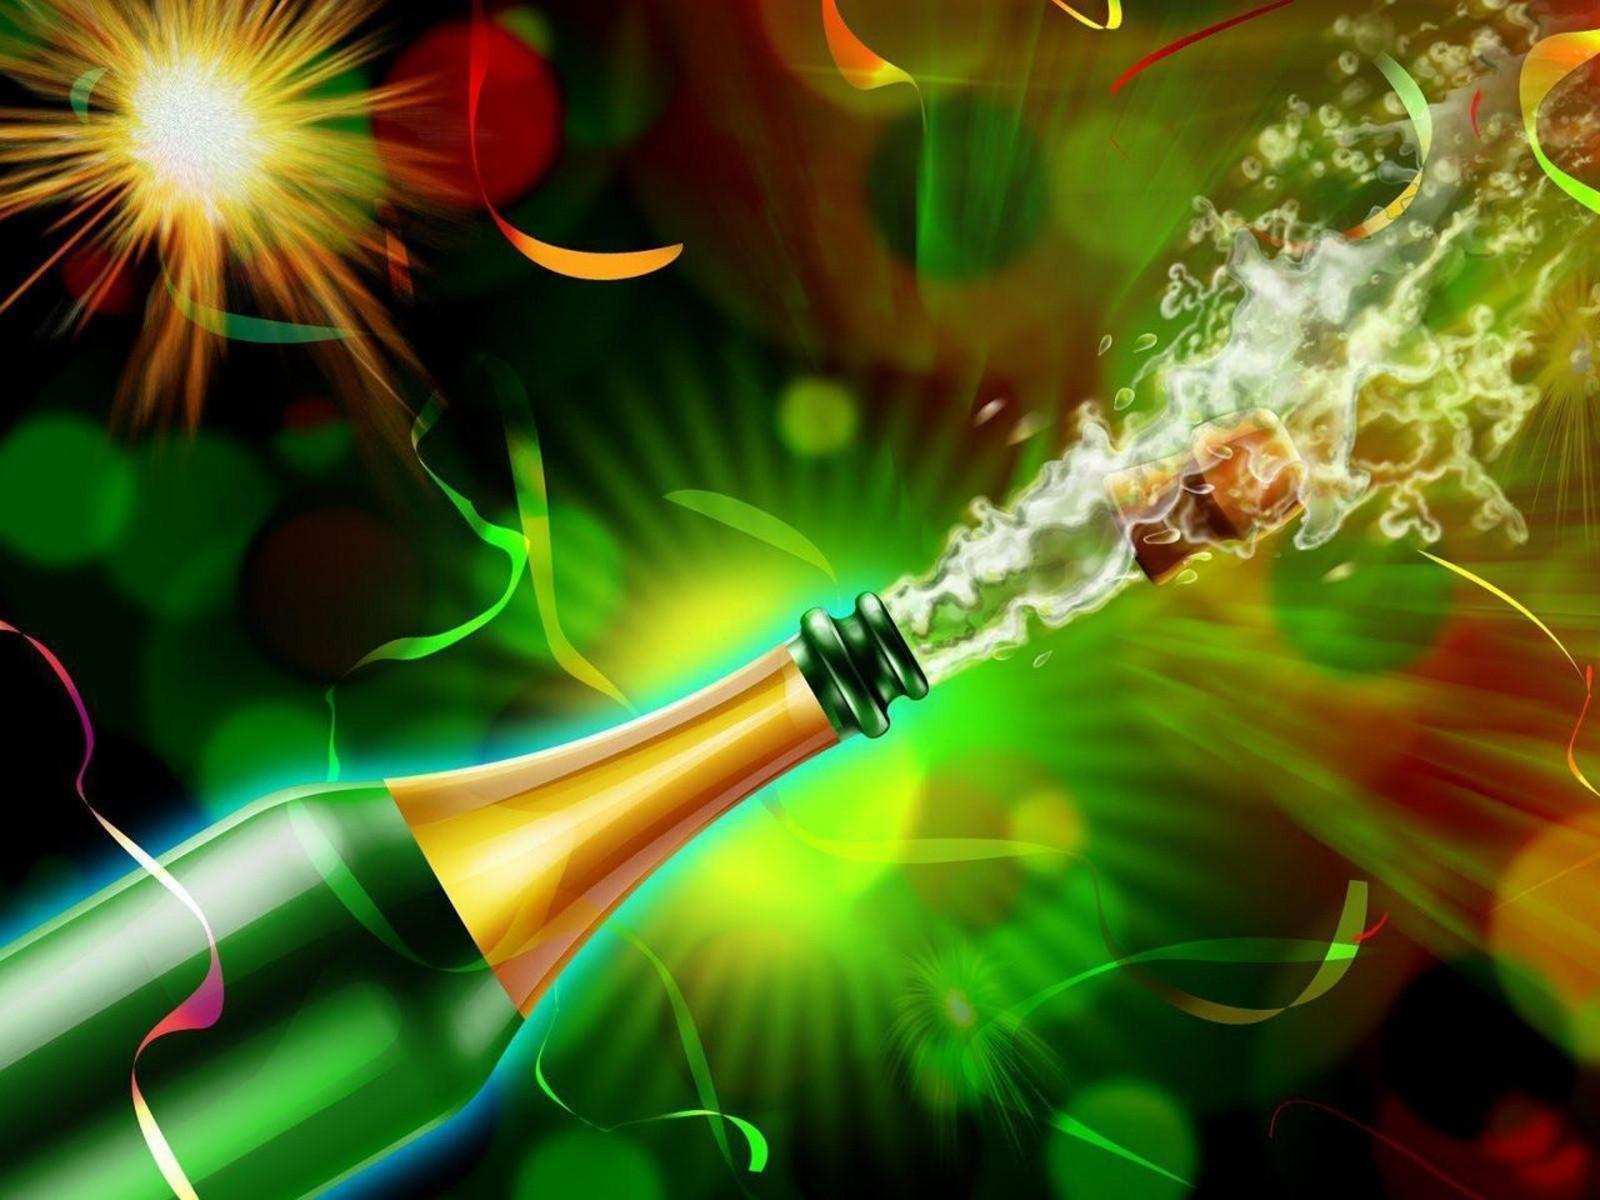 New Year Eve Wallpapers 565 Free Hd Desktop Wallpapers Res